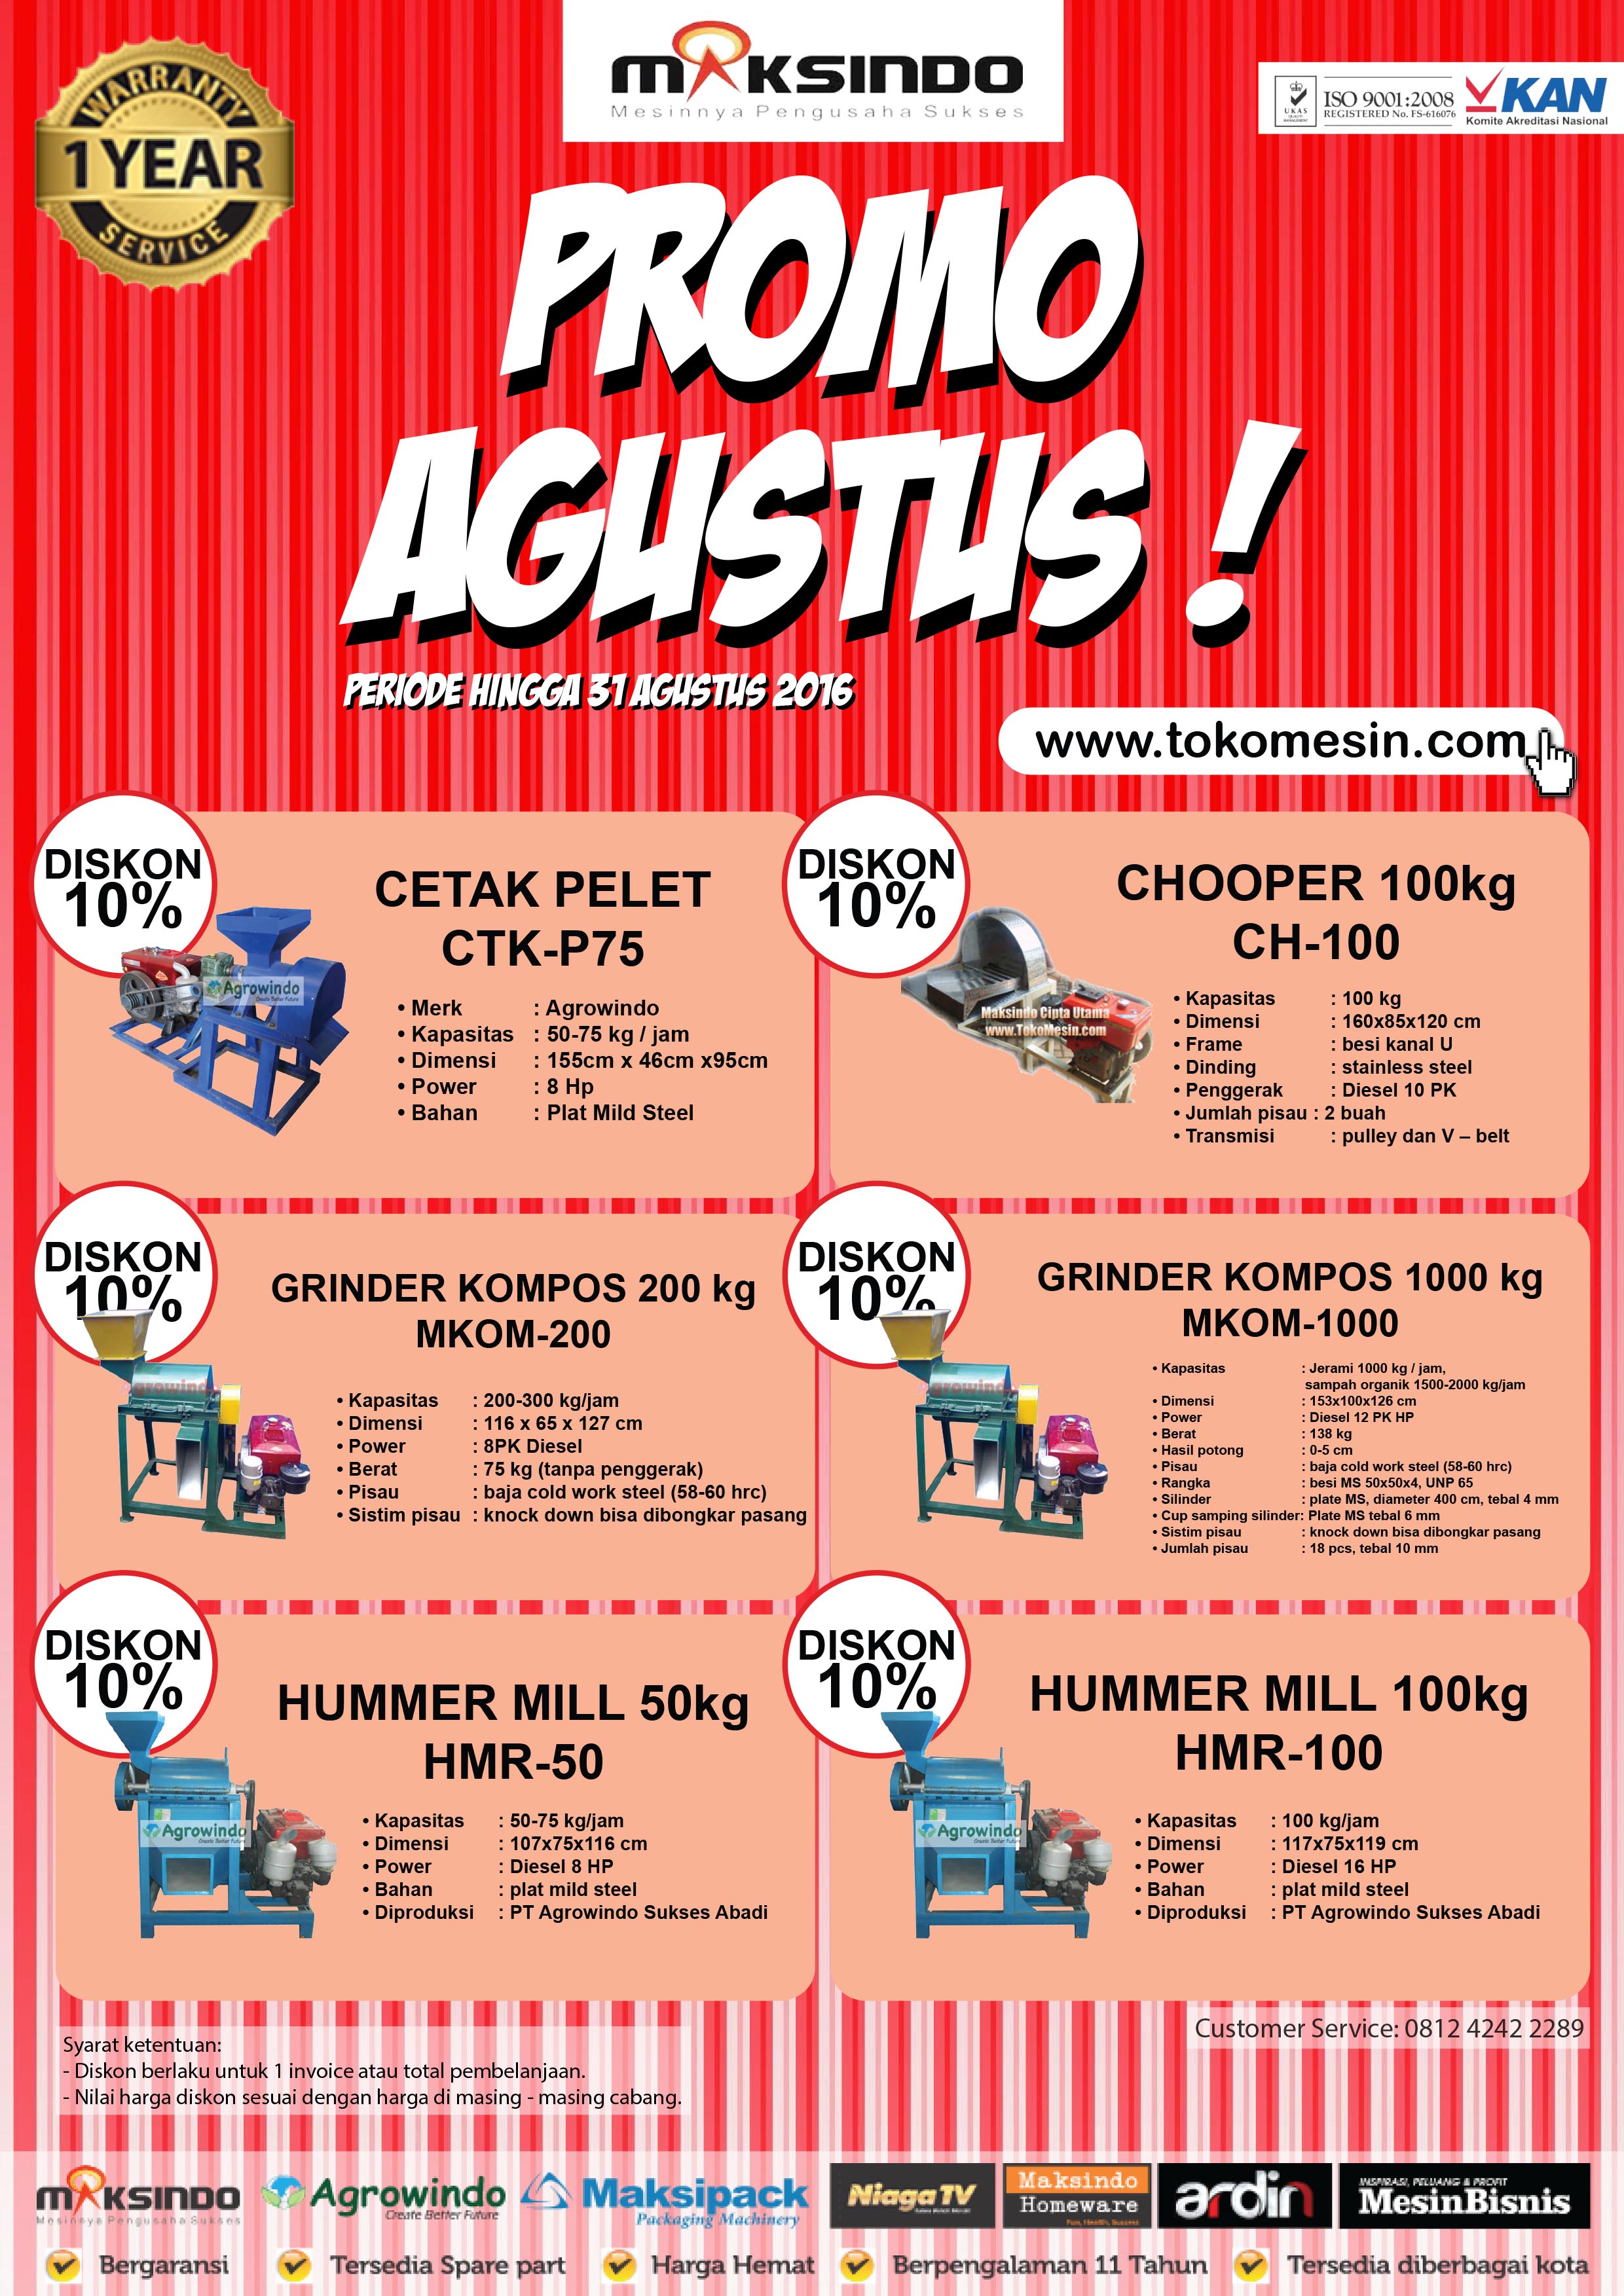 PROMO AGUSTUS UP TO 10 %